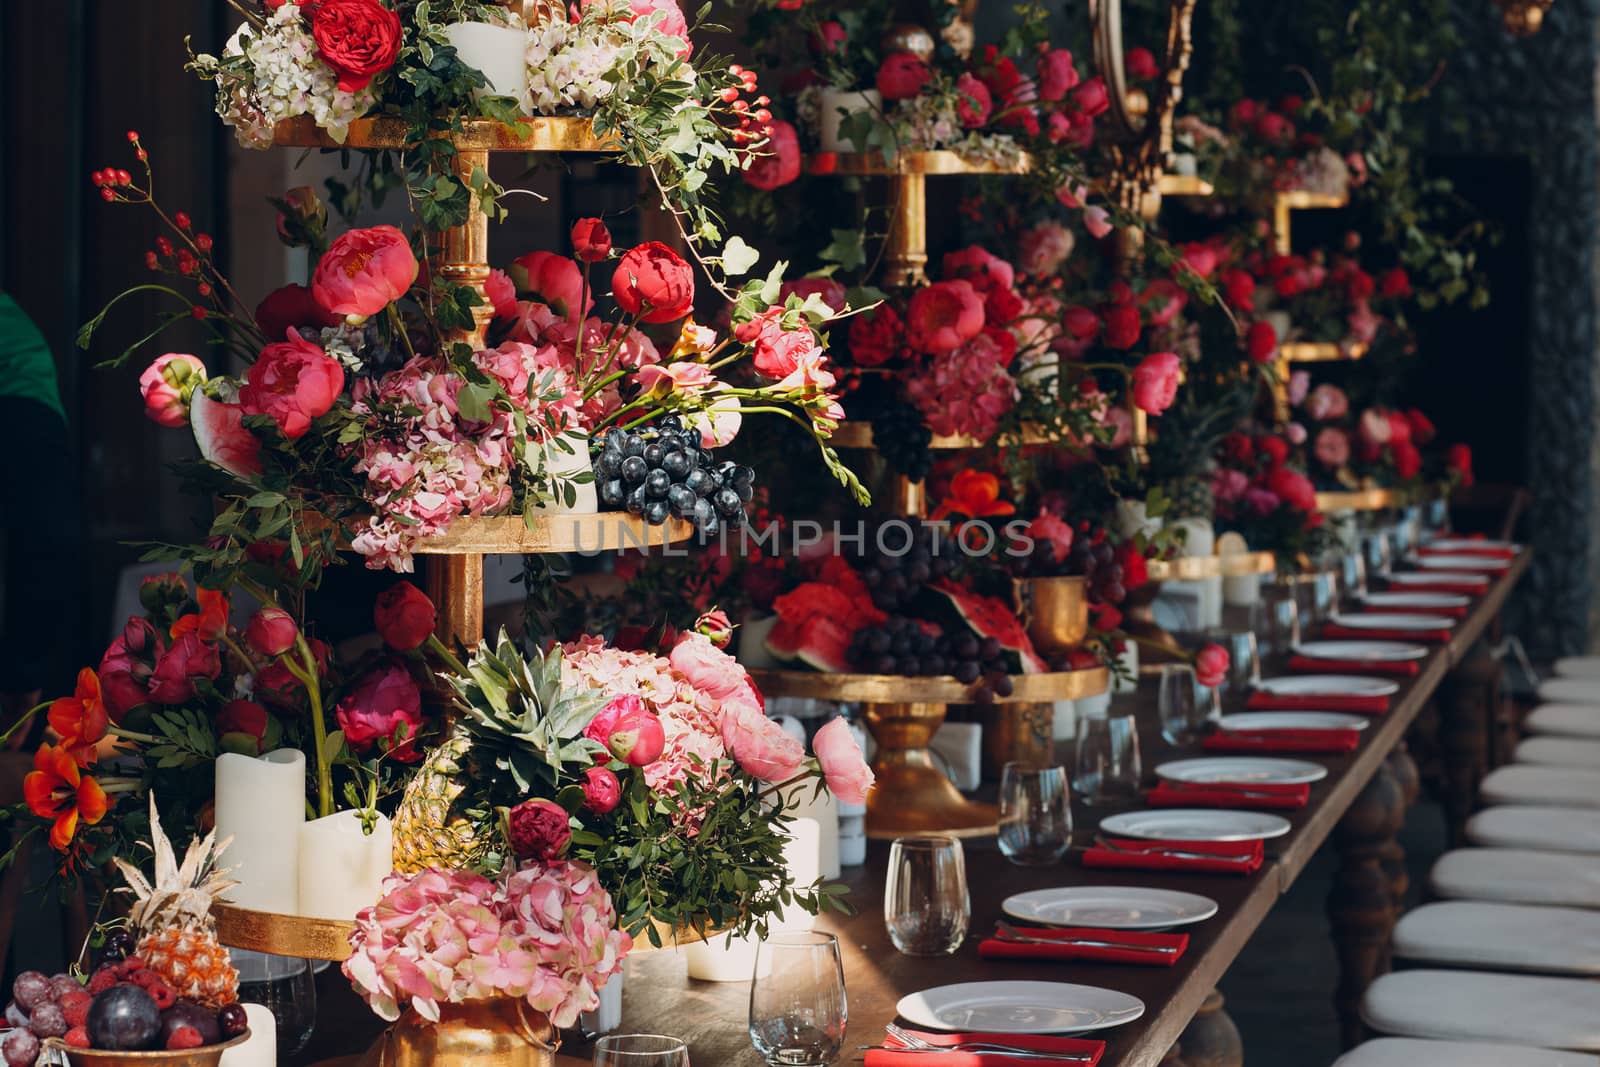 Wedding table flowers with fruits and berries decor in red white pink green colors.